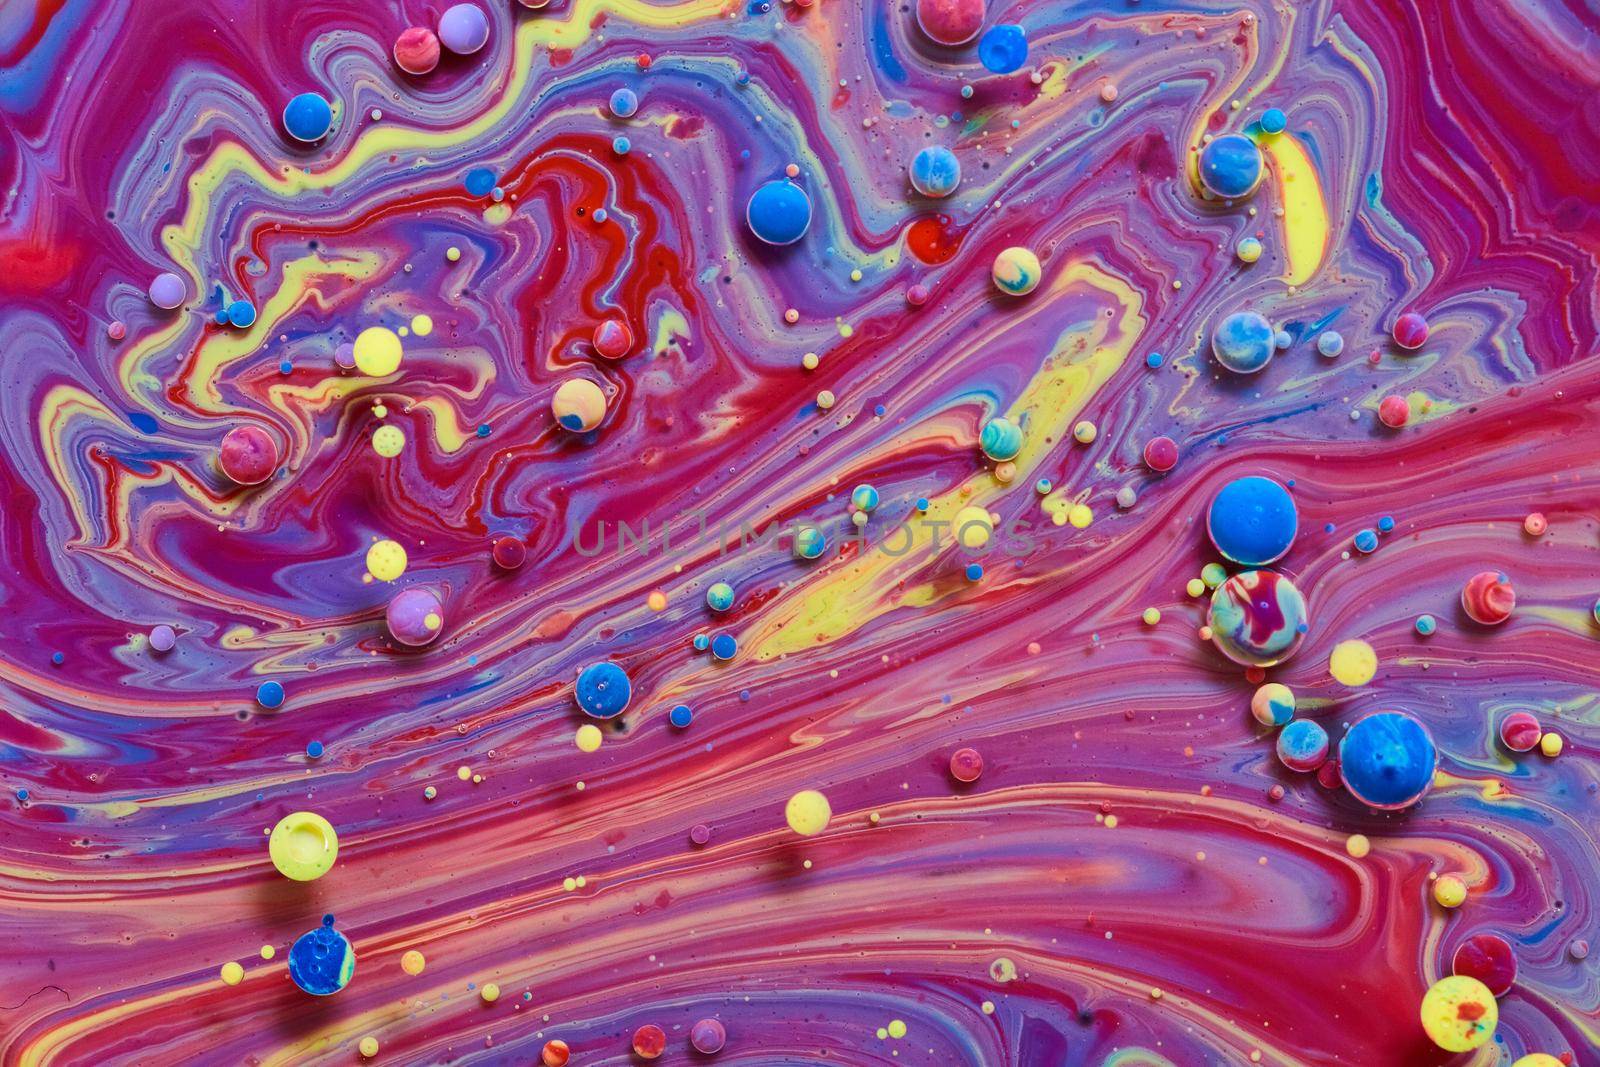 Mixing milk, paint, and oil to create mystical rainbow colors and orbs by njproductions